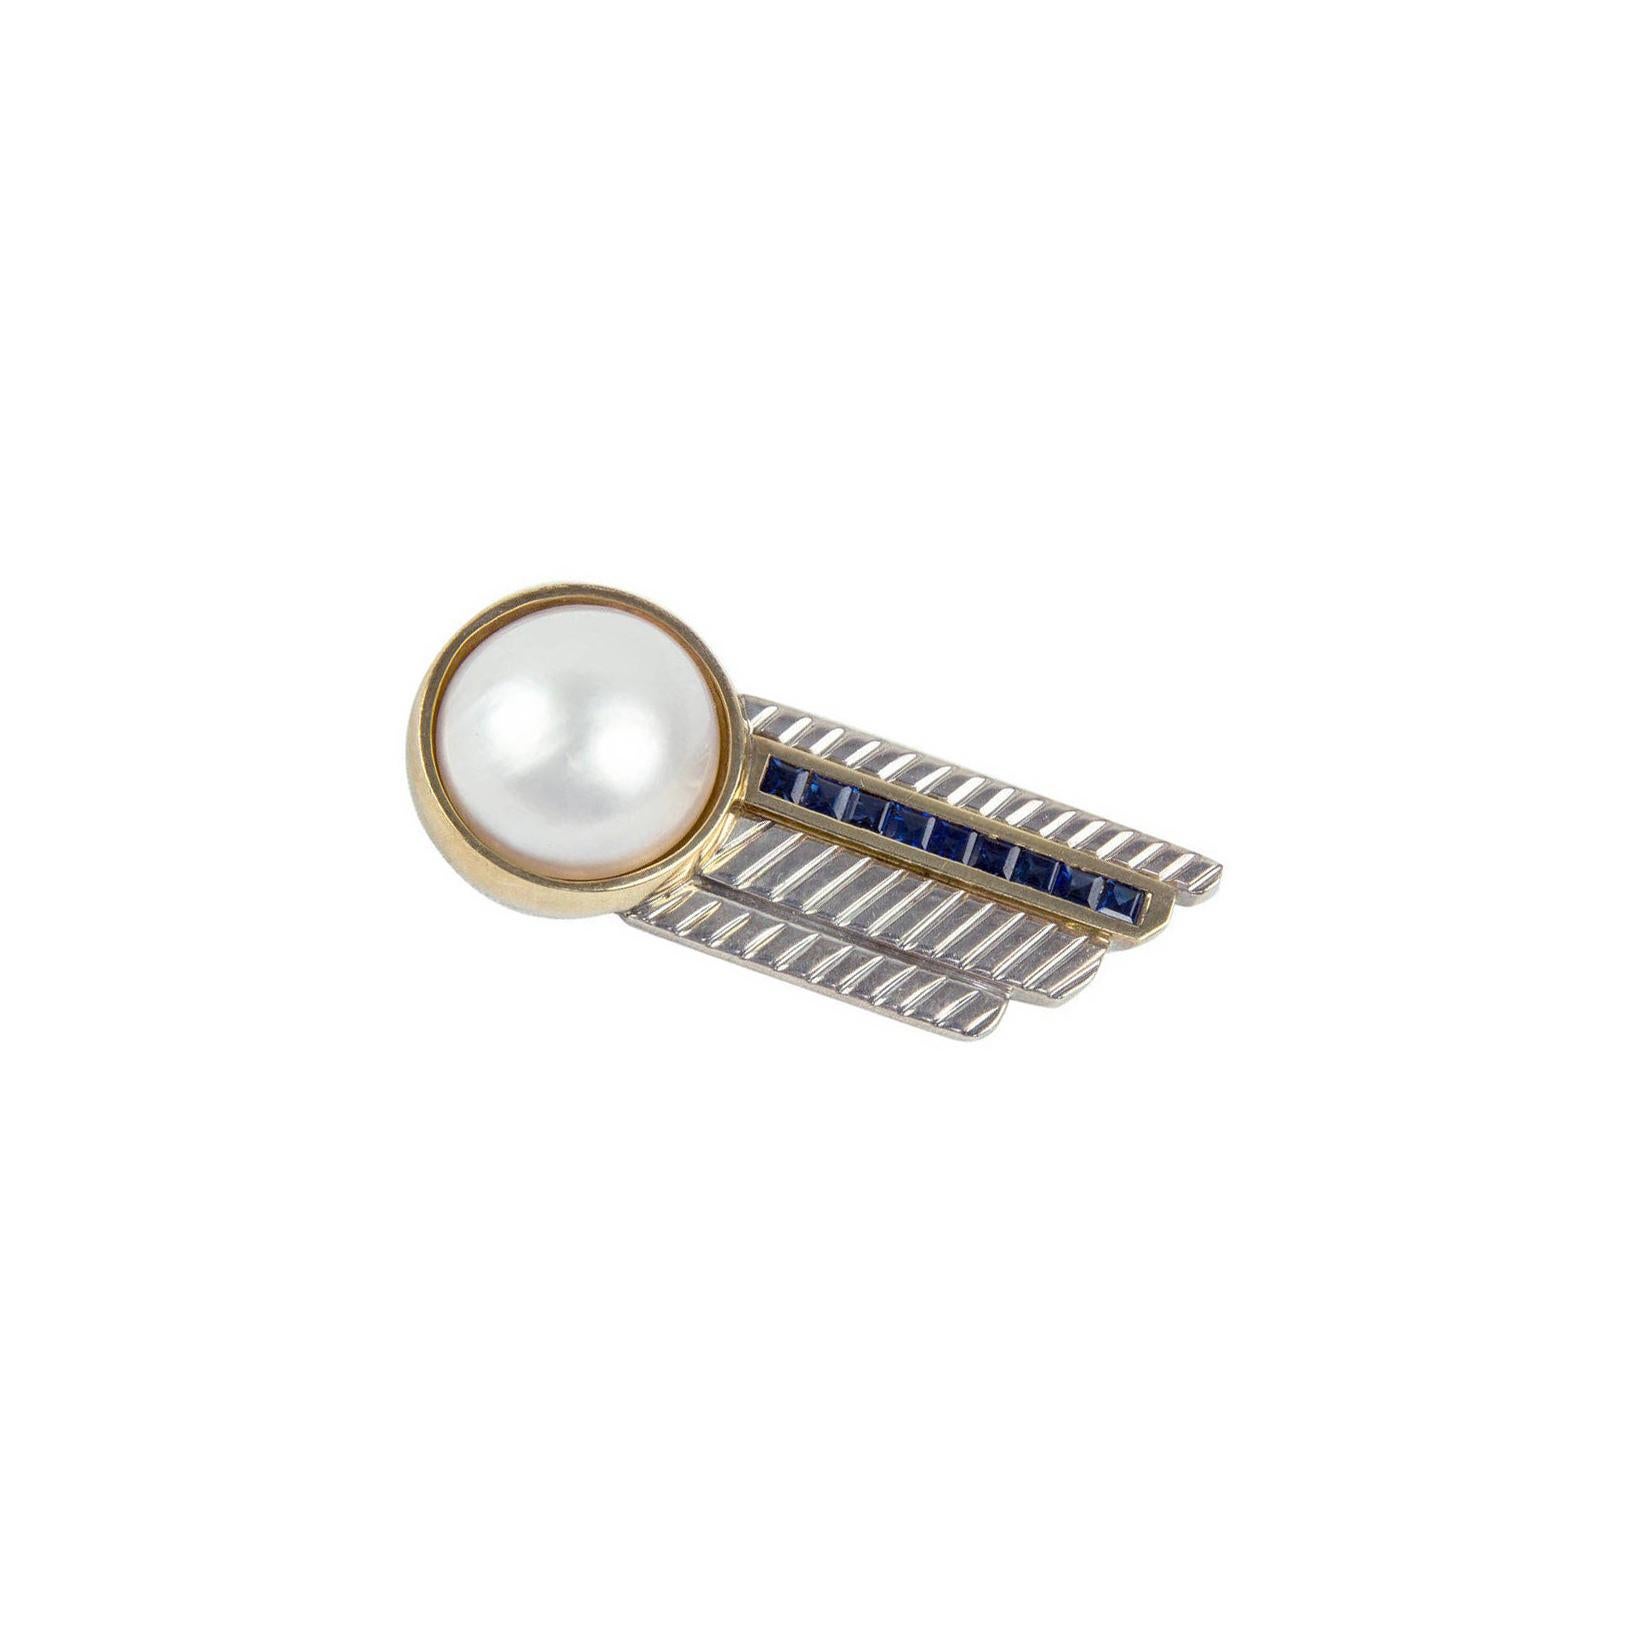 Vintage Iconic Tiffany & Co. Modernist Pearl Sapphire Sterling Gold Brooch Pin In Excellent Condition For Sale In Montreal, QC